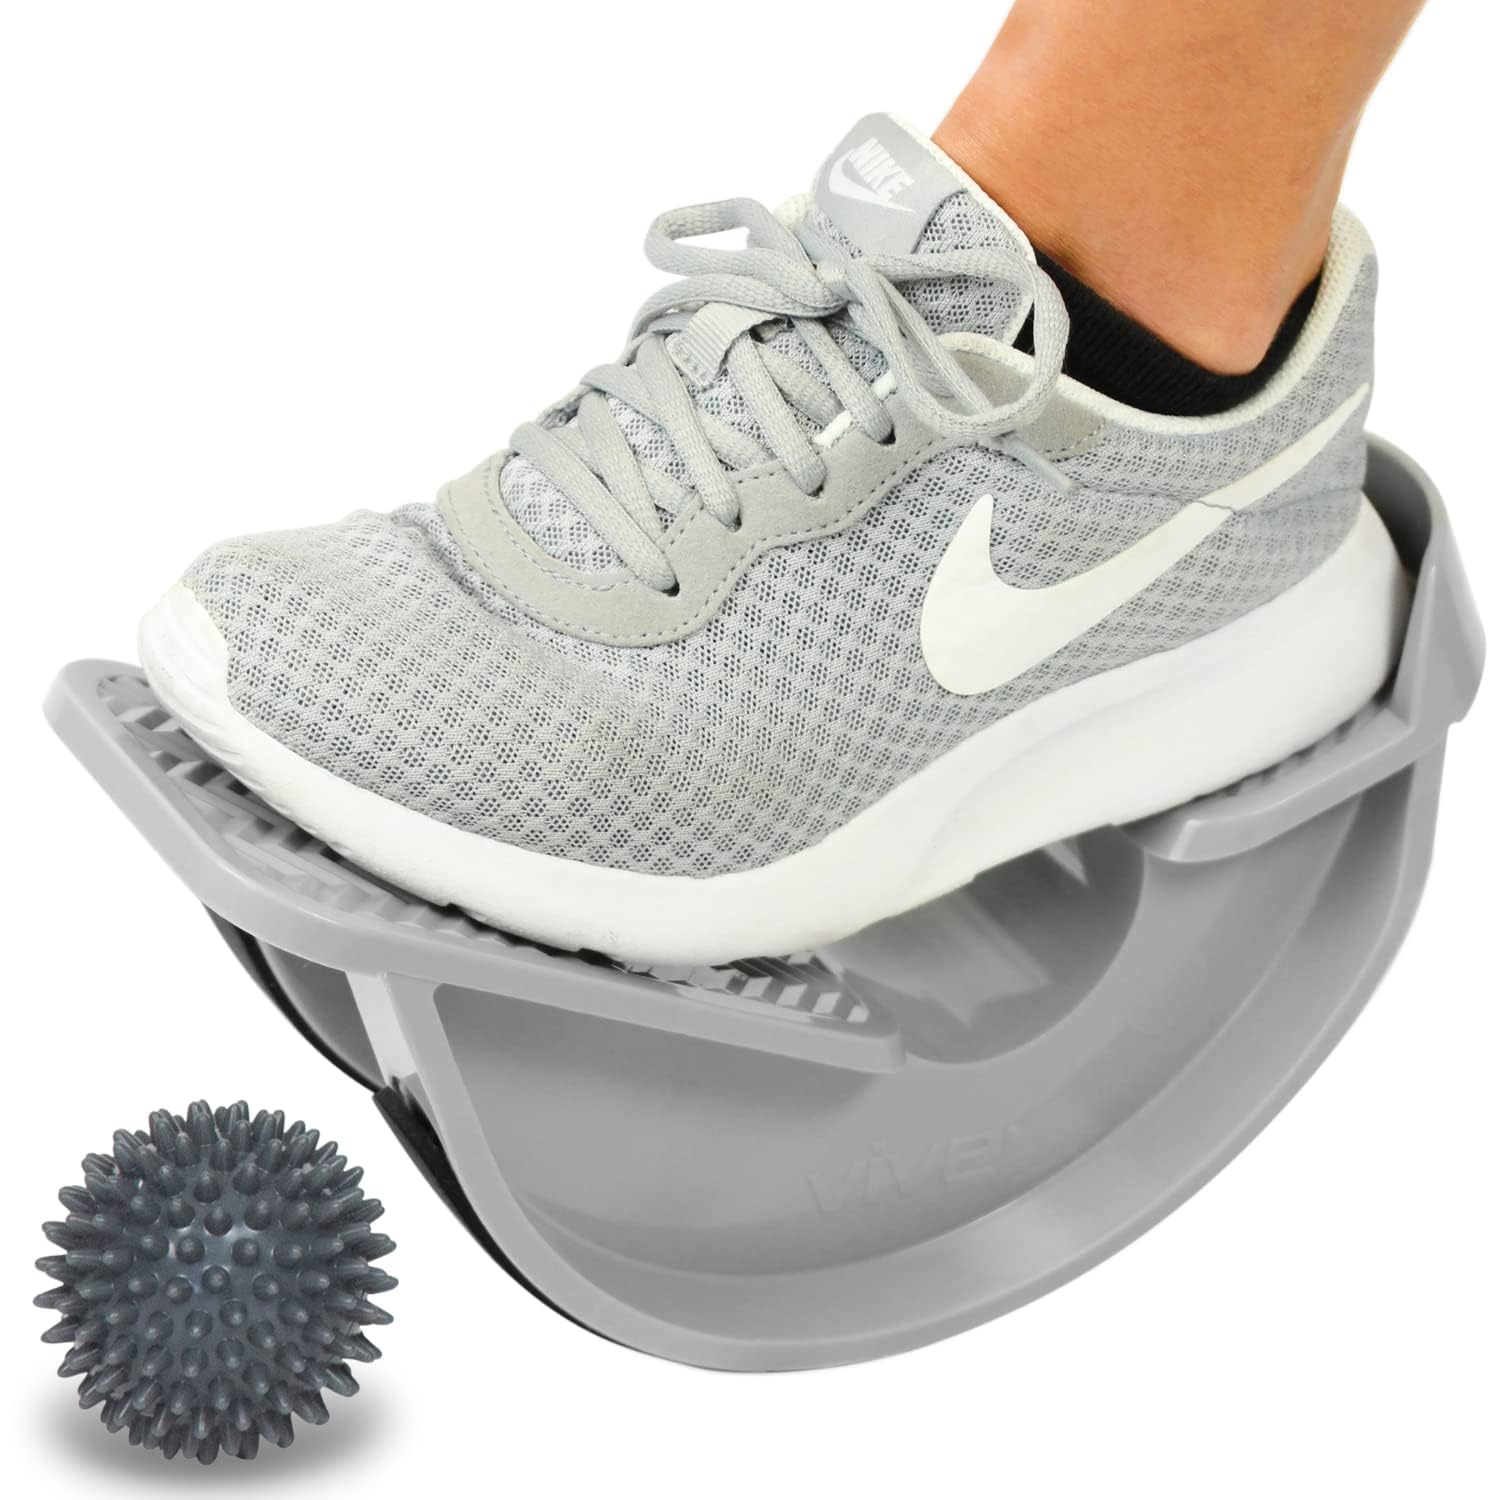 Vive Foot Rocker | Gadgets to Relieve Sore Muscles